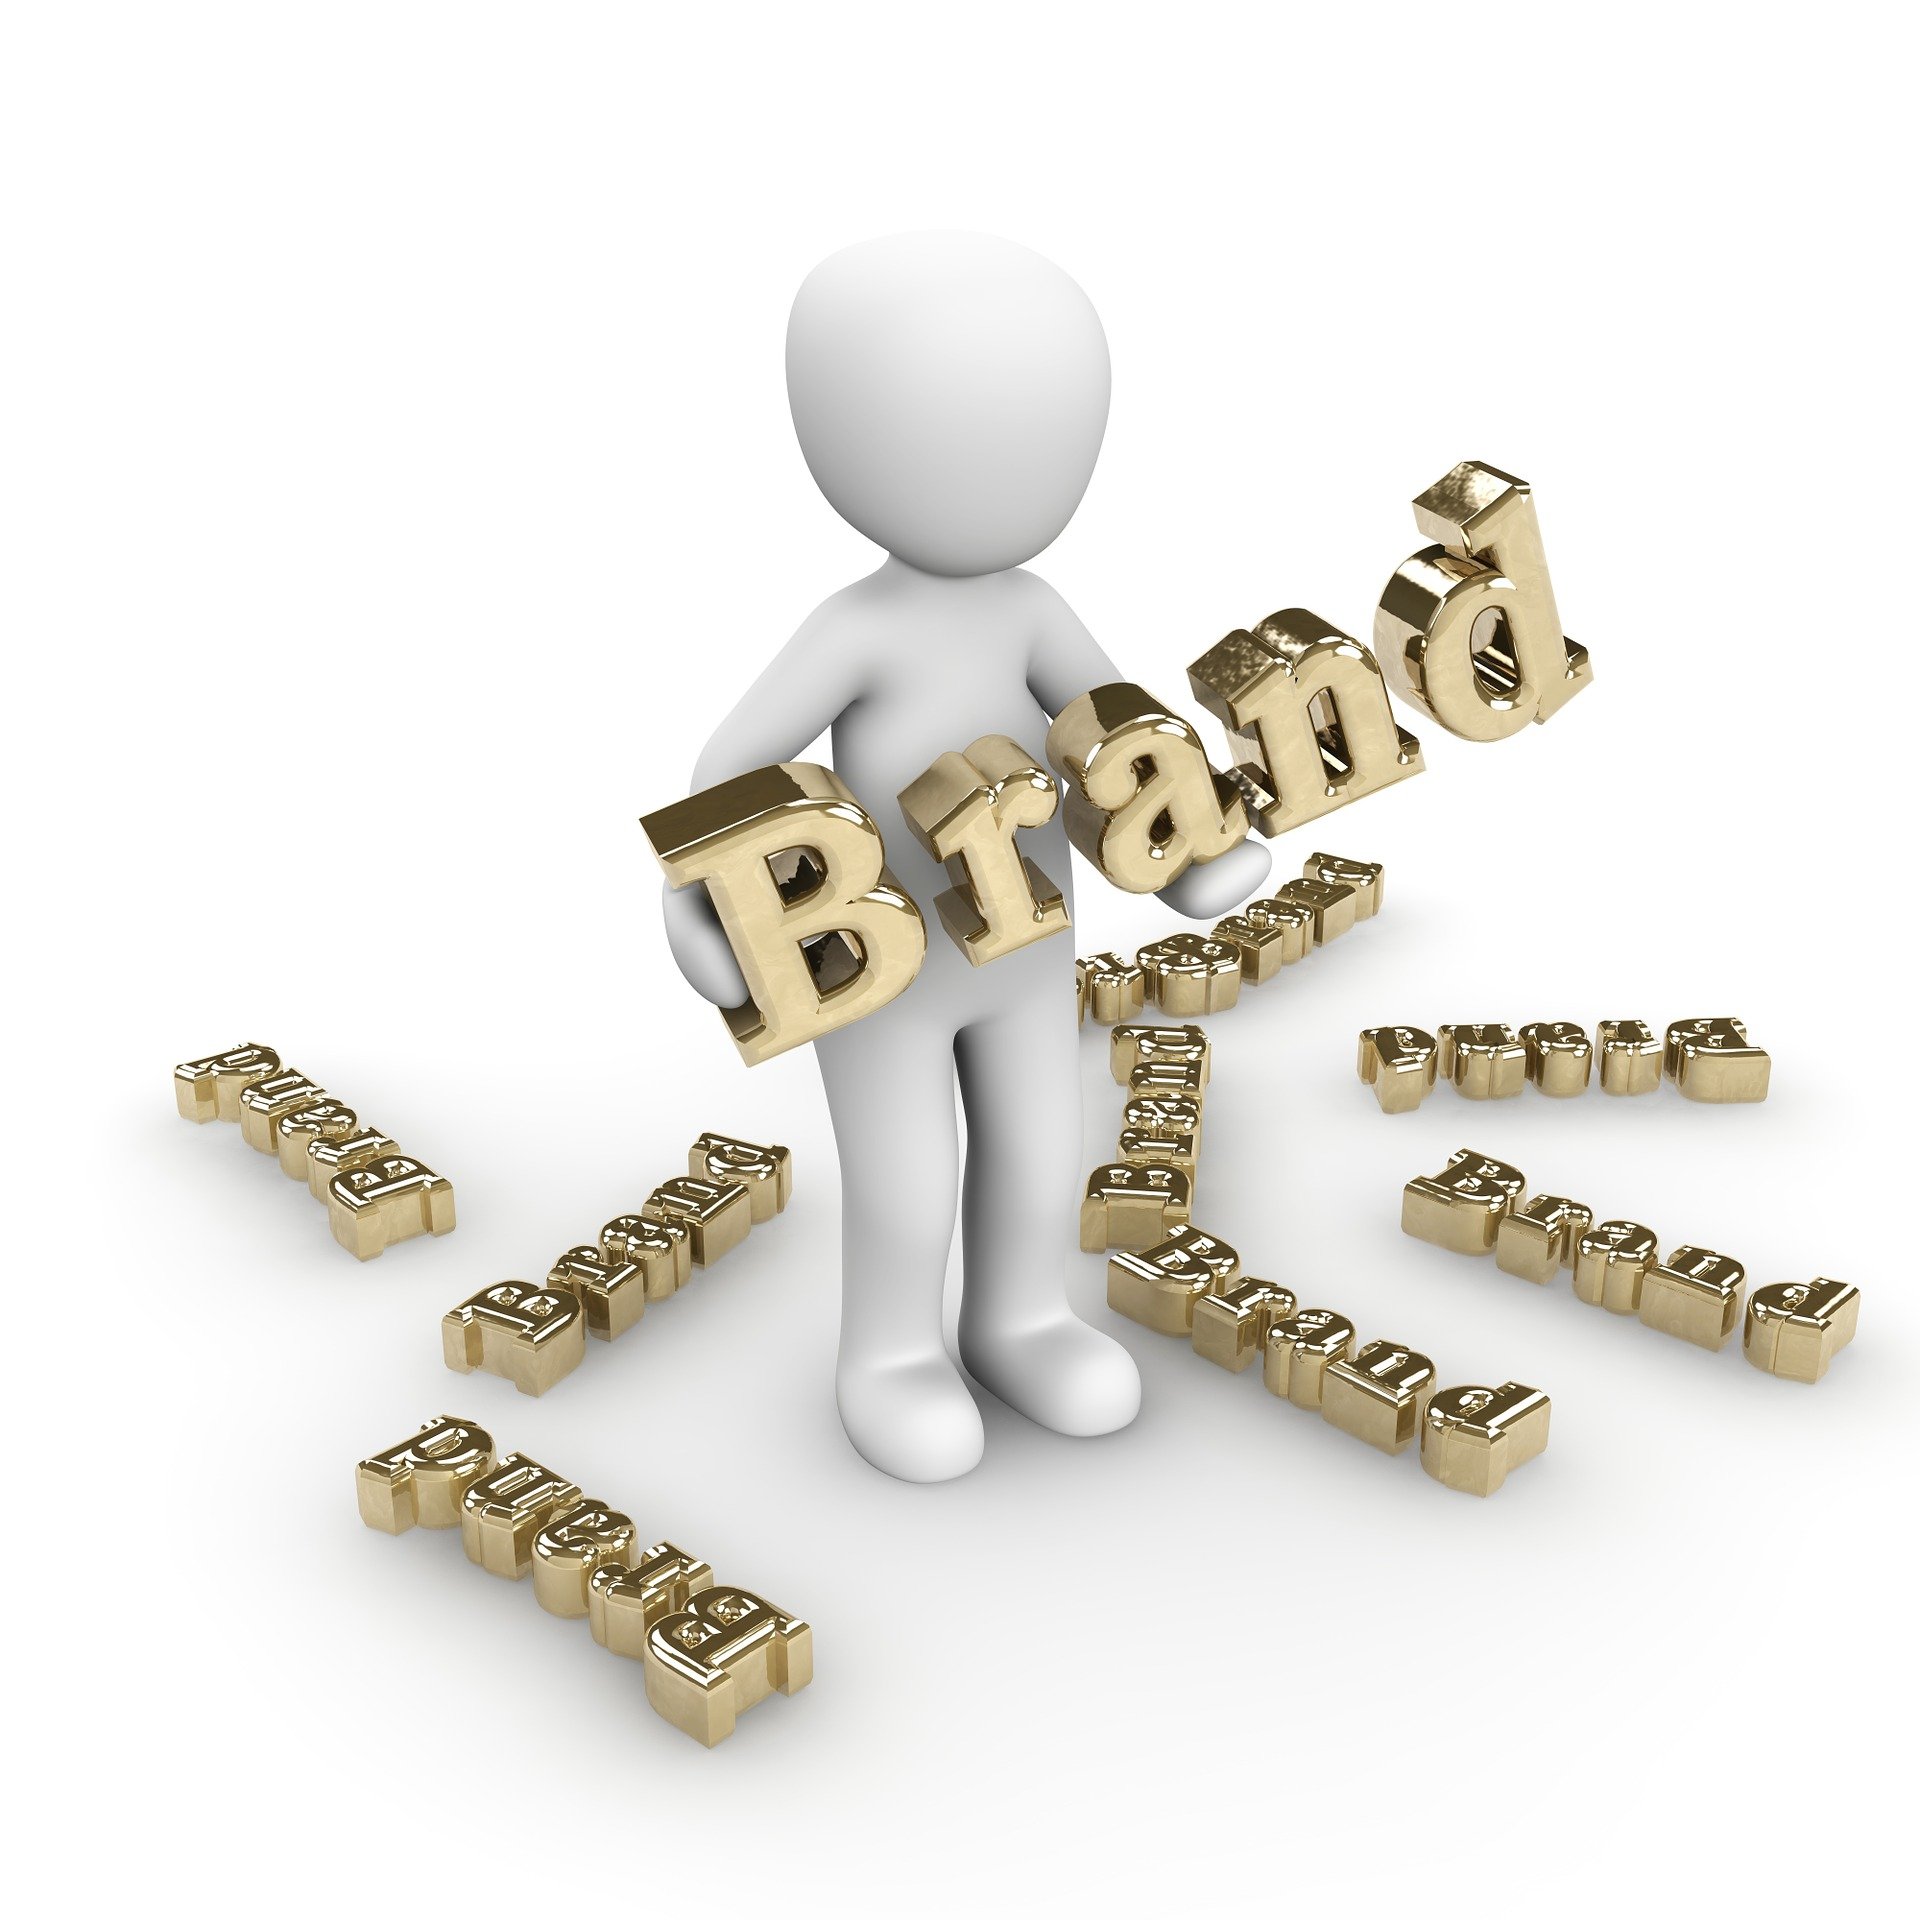 How Does Branding Help In Marketing?